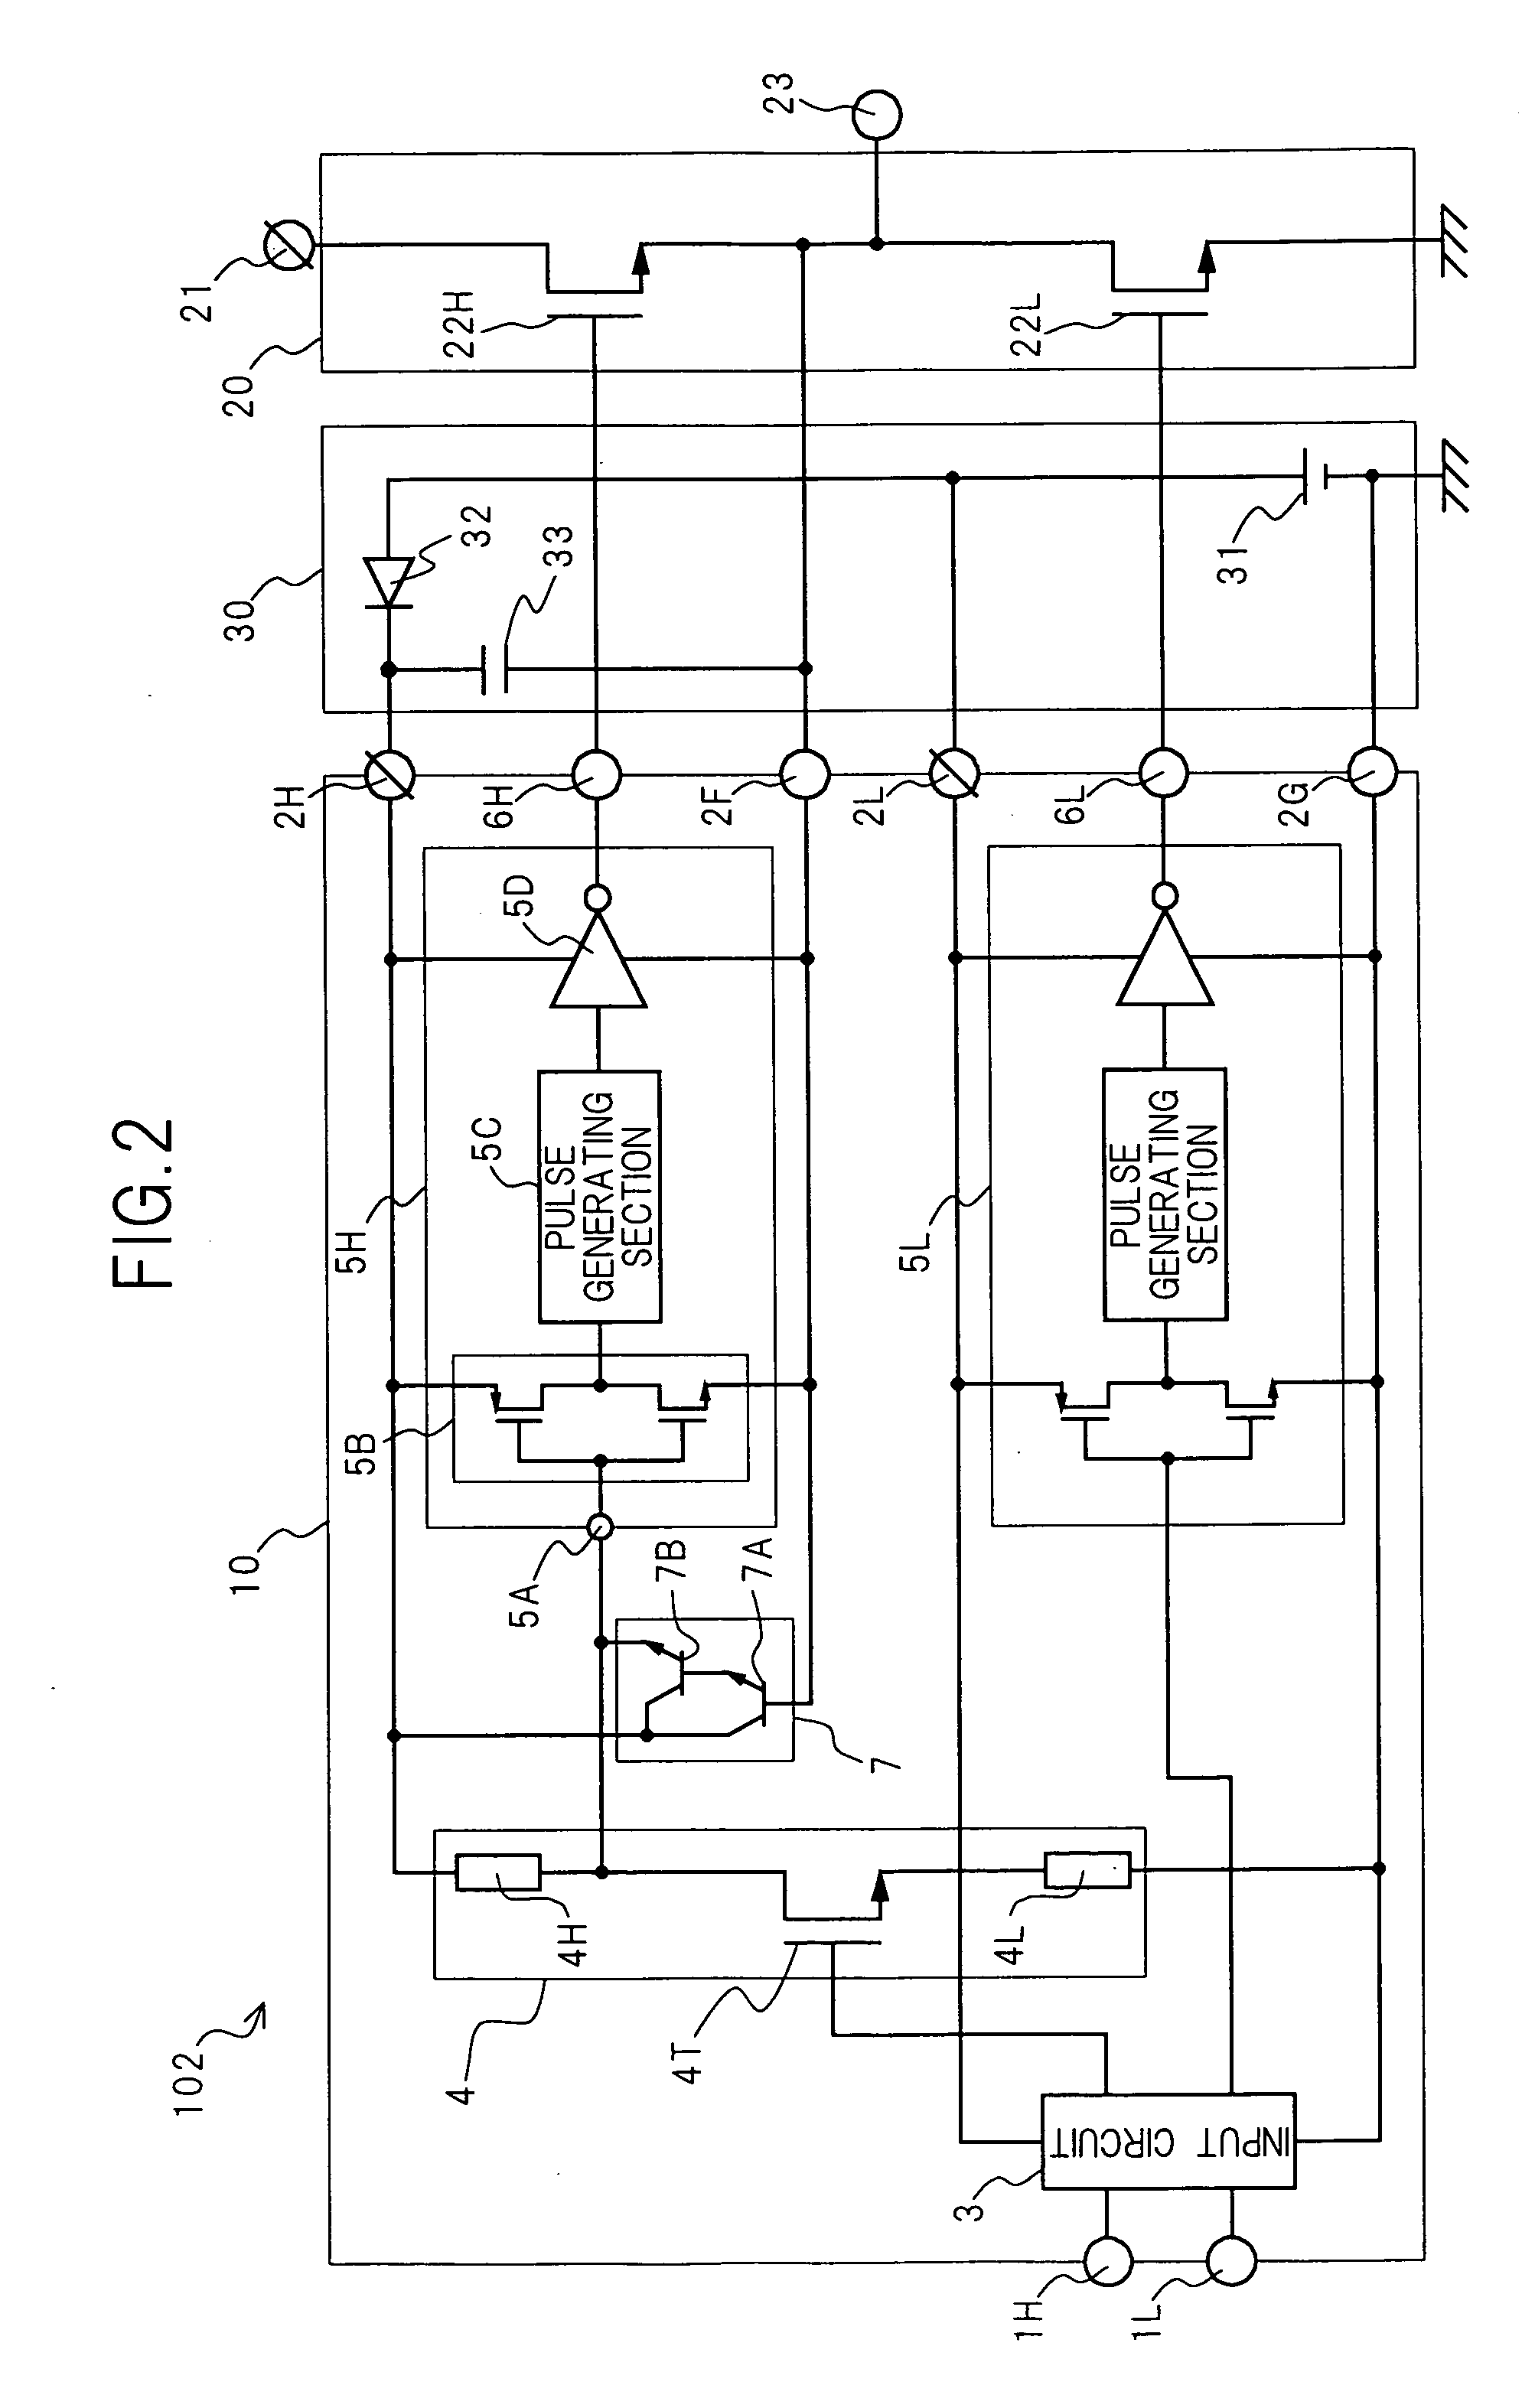 Sustain driver, sustain control system, and plasma display